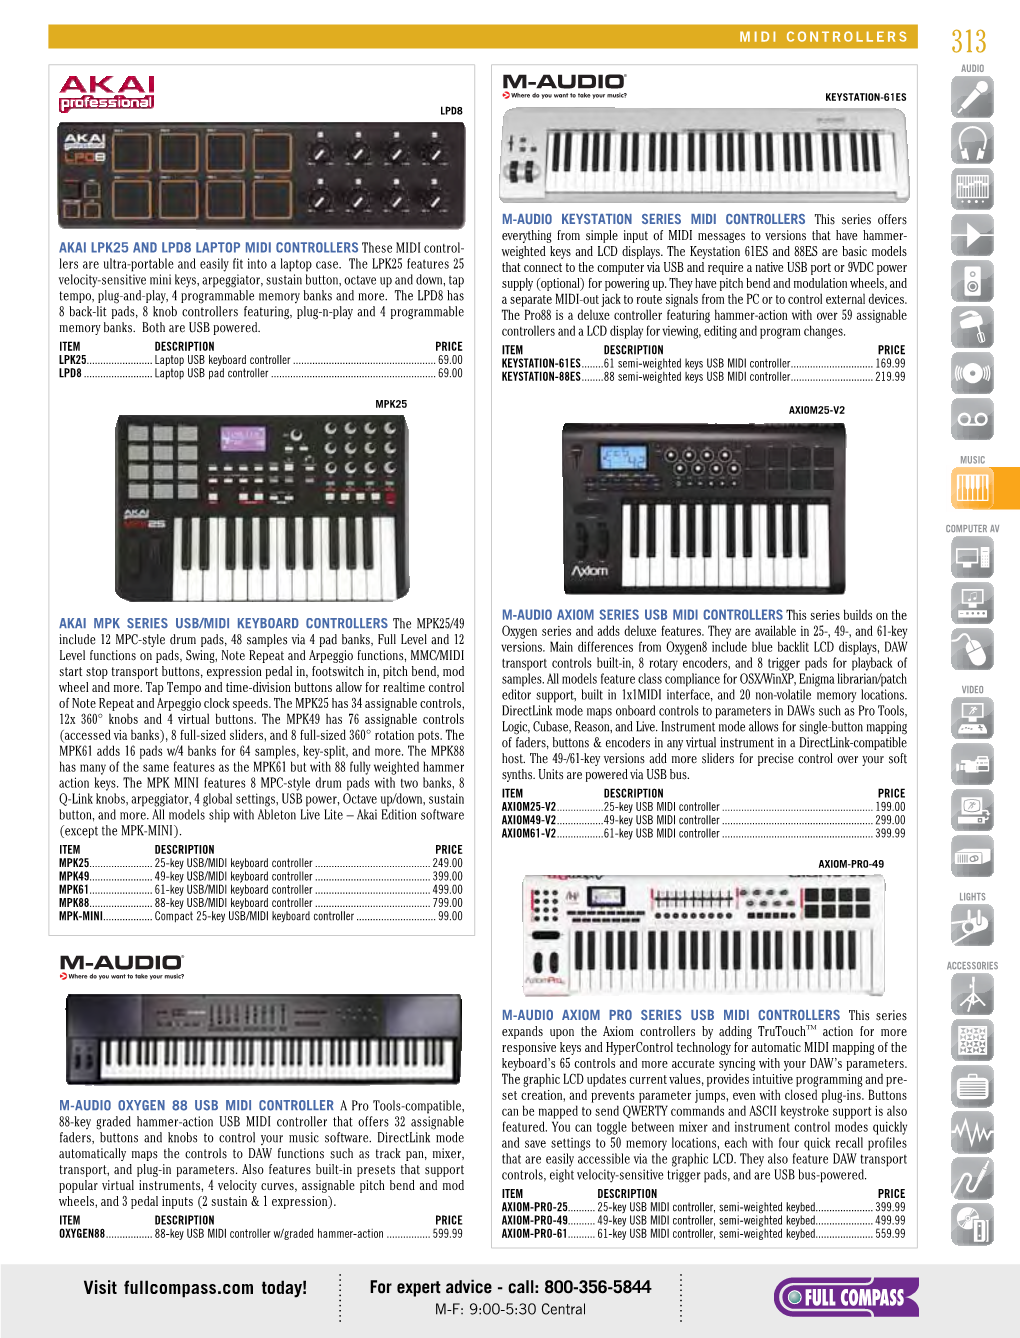 Visit Fullcompass.Com Today! for Expert Advice - Call: 800-356-5844 M-F: 9:00-5:30 Central 314 MIDI CONTROLLERS MIDI INTERFACES